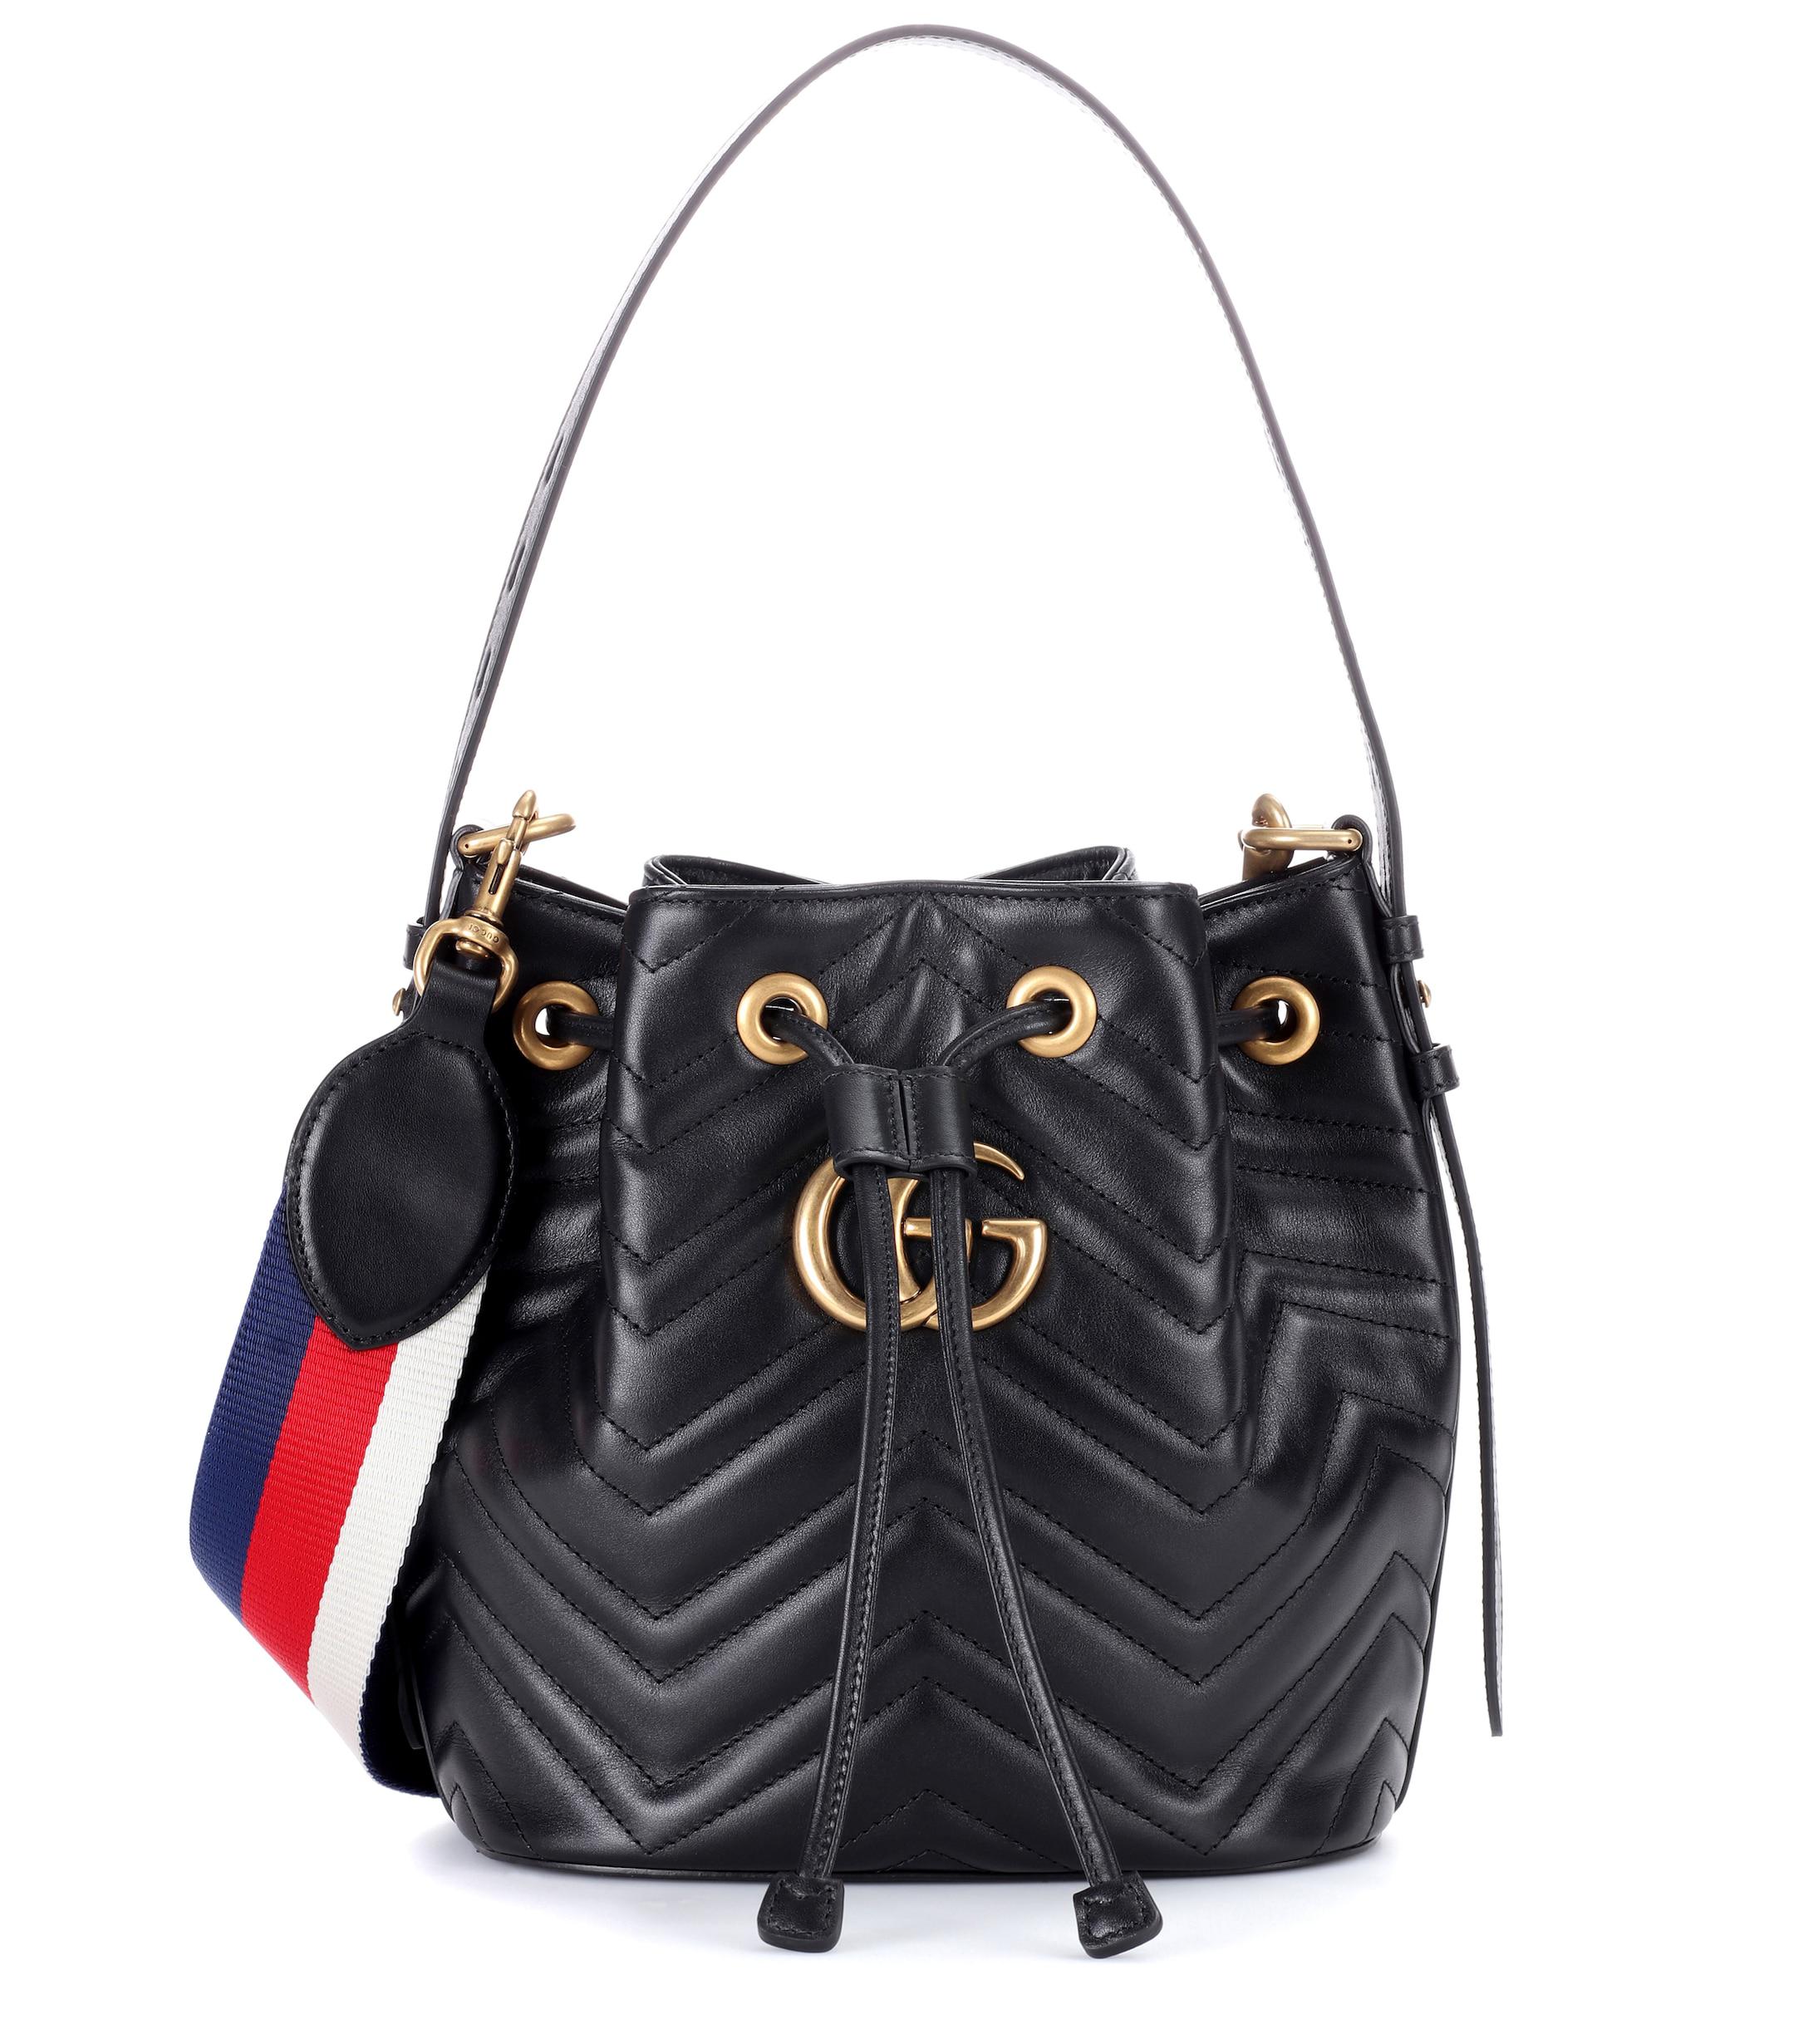 Gucci GG Marmont Leather Bucket Bag in Black Chevron Leather (Black) - Lyst